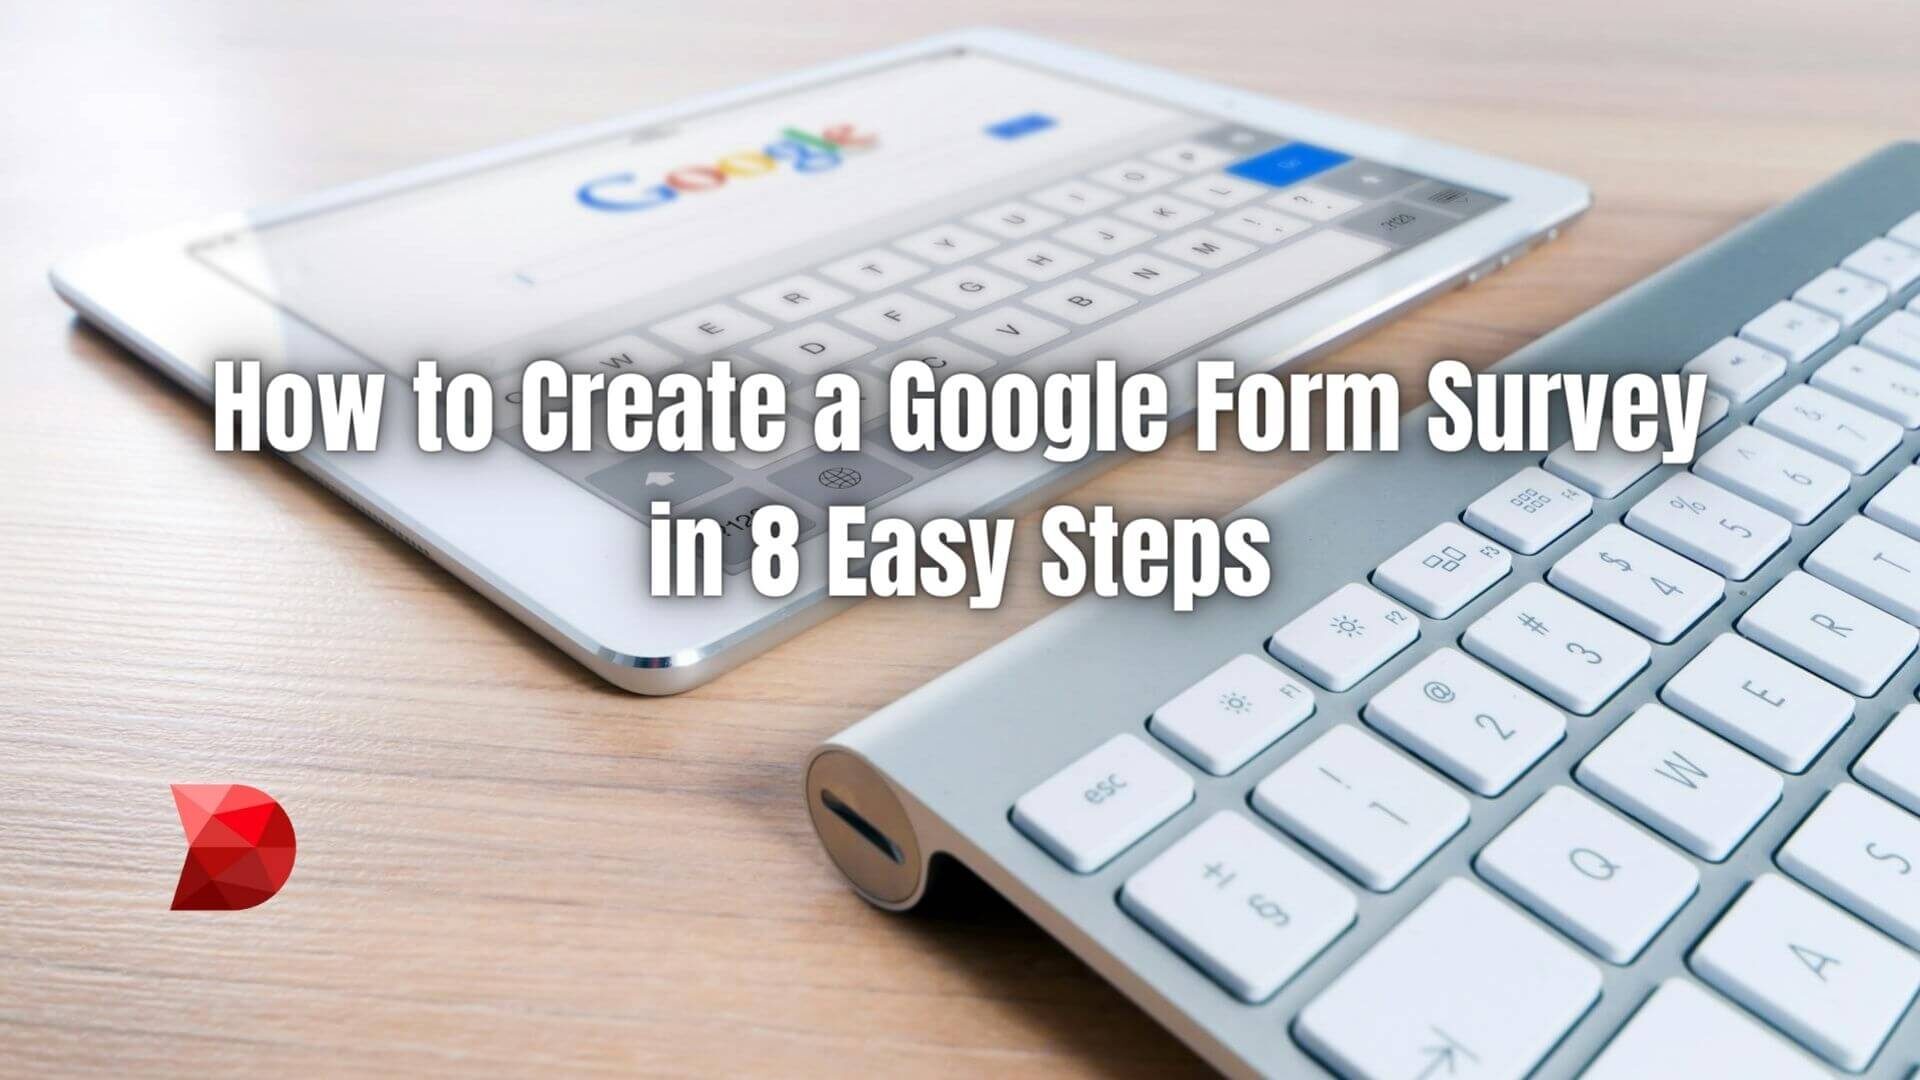 Easily design surveys and gather insights like a pro! Click here to unlock the secrets of creating a Google Form survey with 8 easy steps.